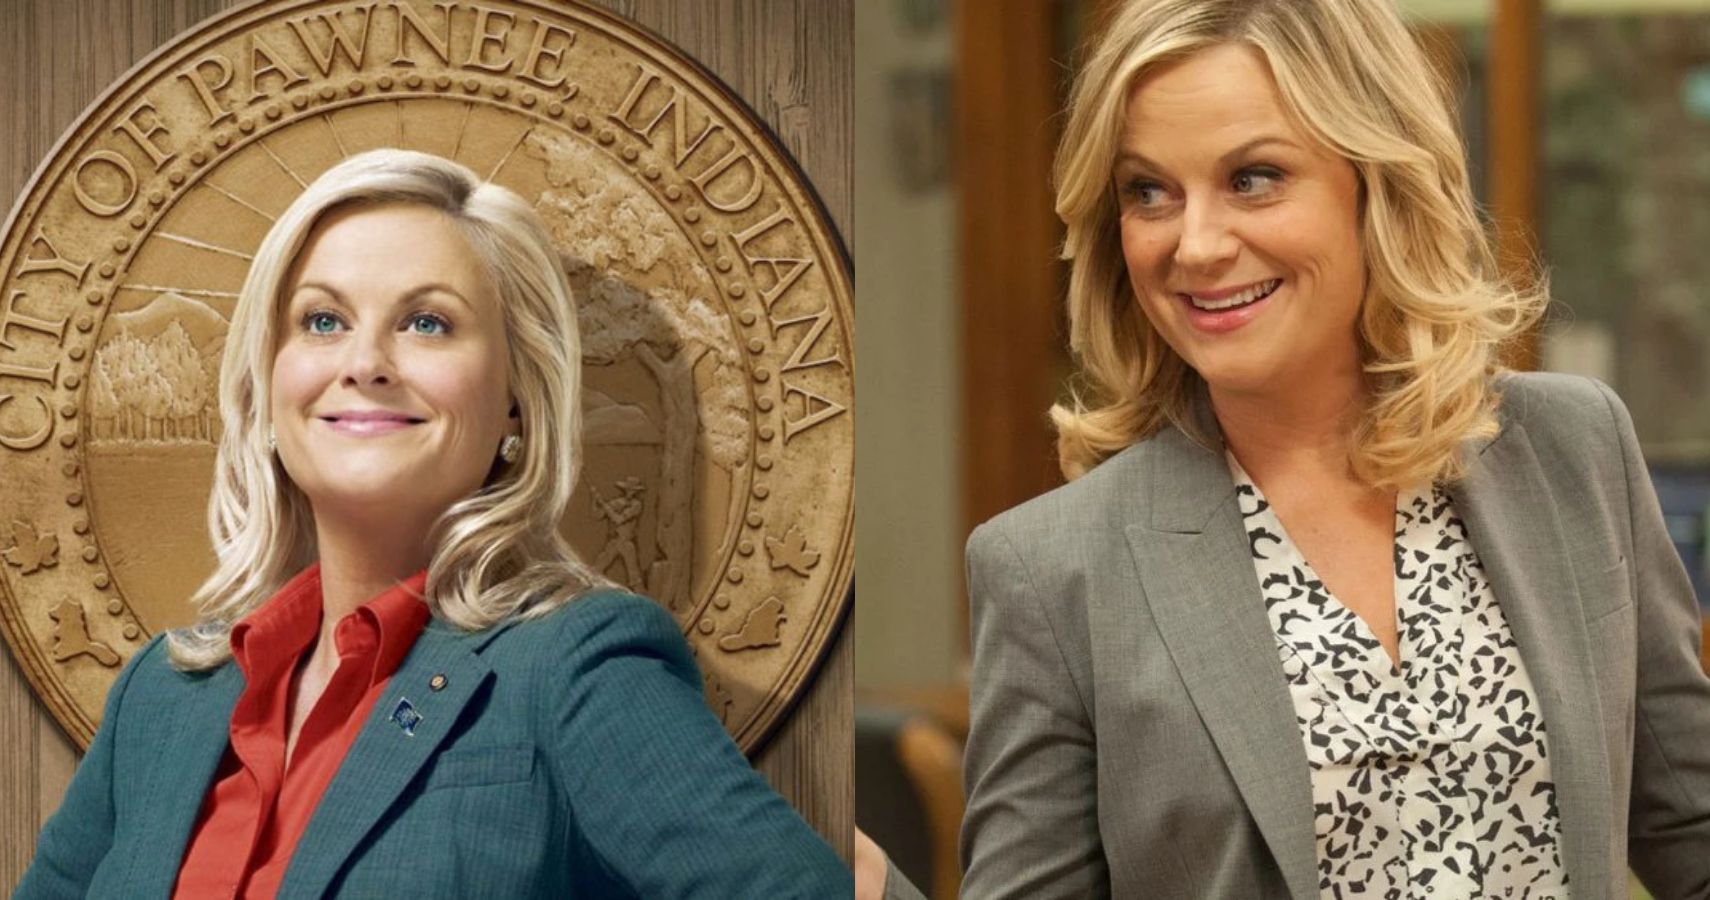 Recreation knope leslie and parks What Are